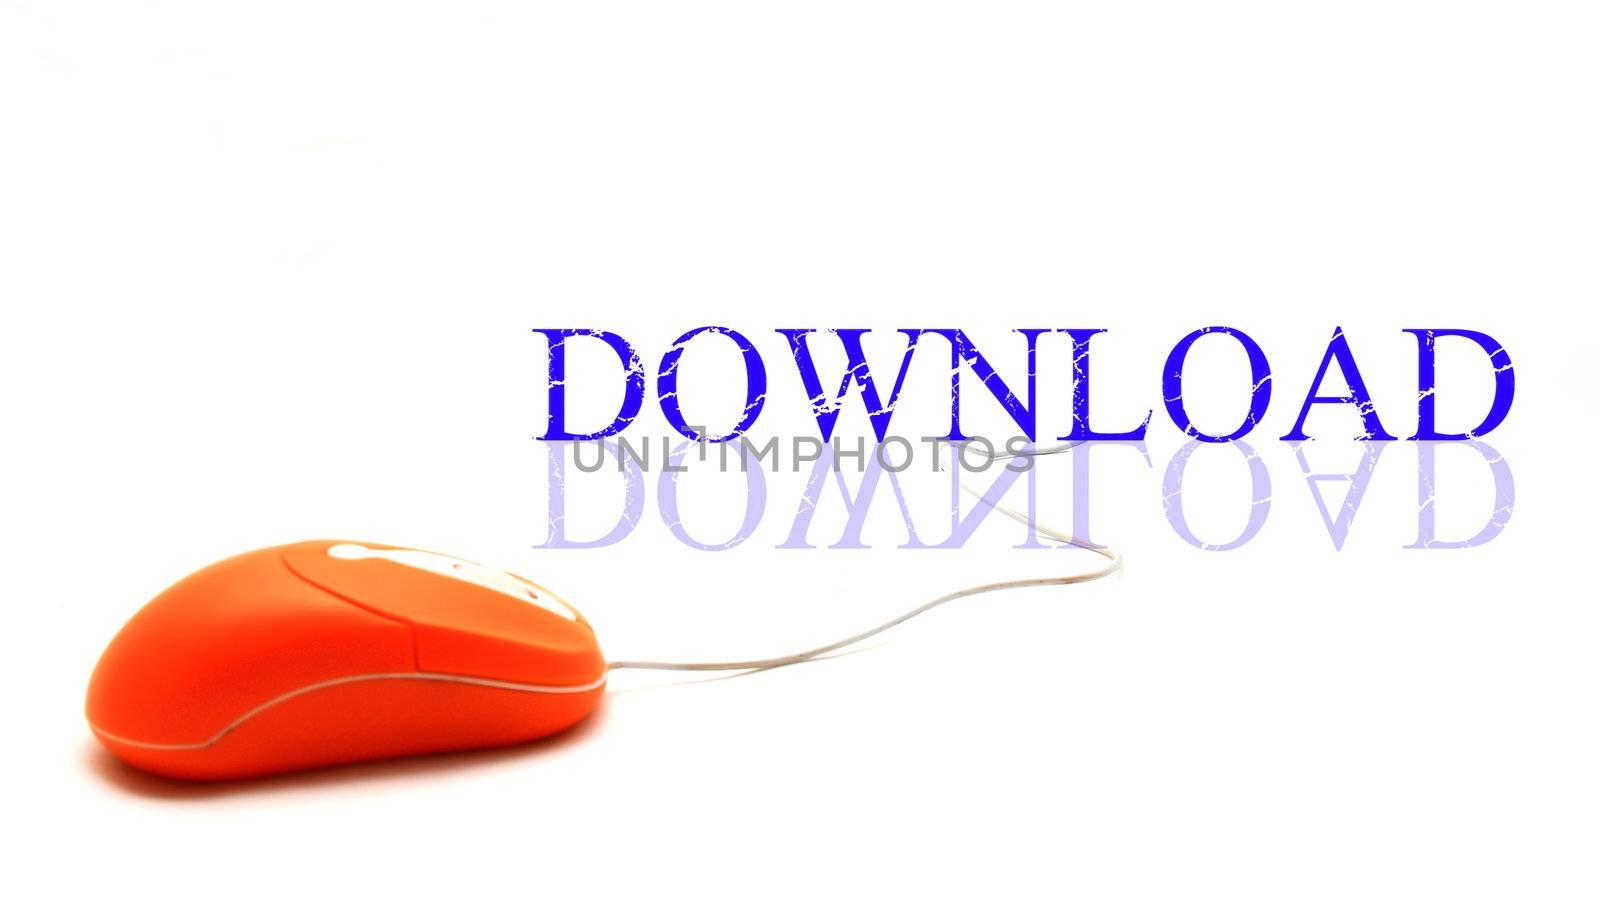 Download word connected with pc mouse